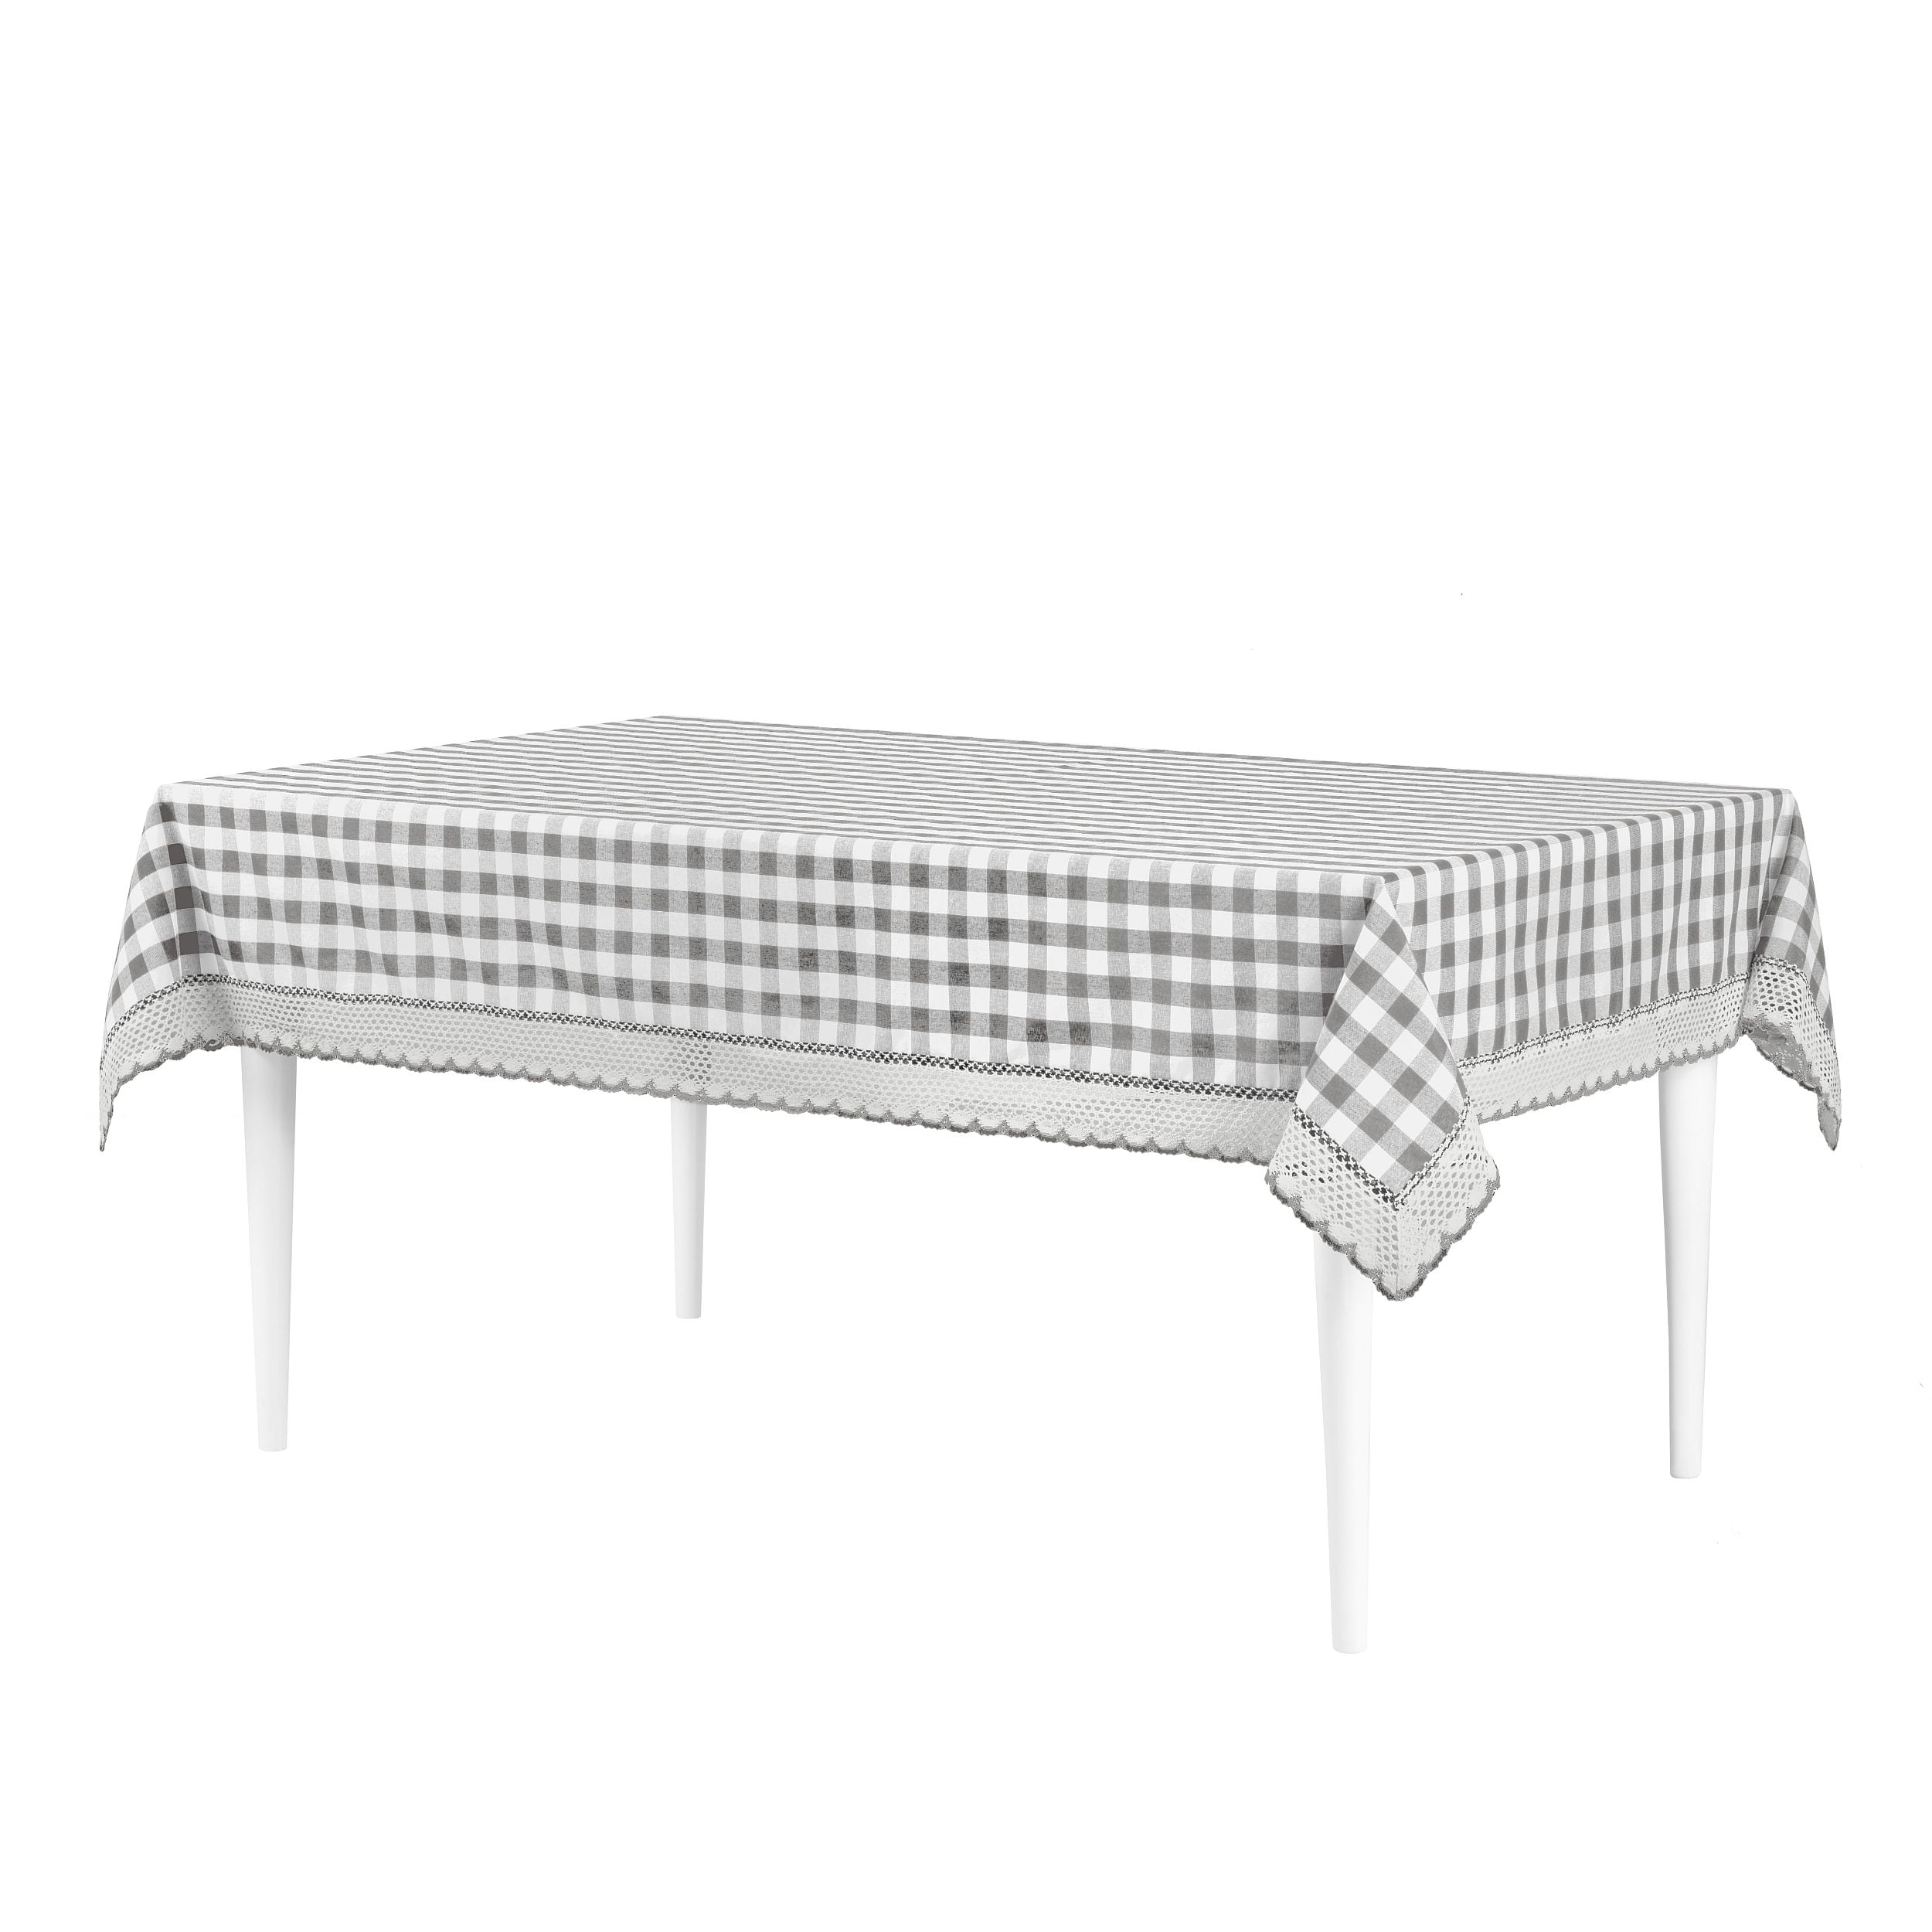 Picture of Achim BCT120GY24 60 x 120 in. Buffalo Check Tablecloth with Macram Trim Grey